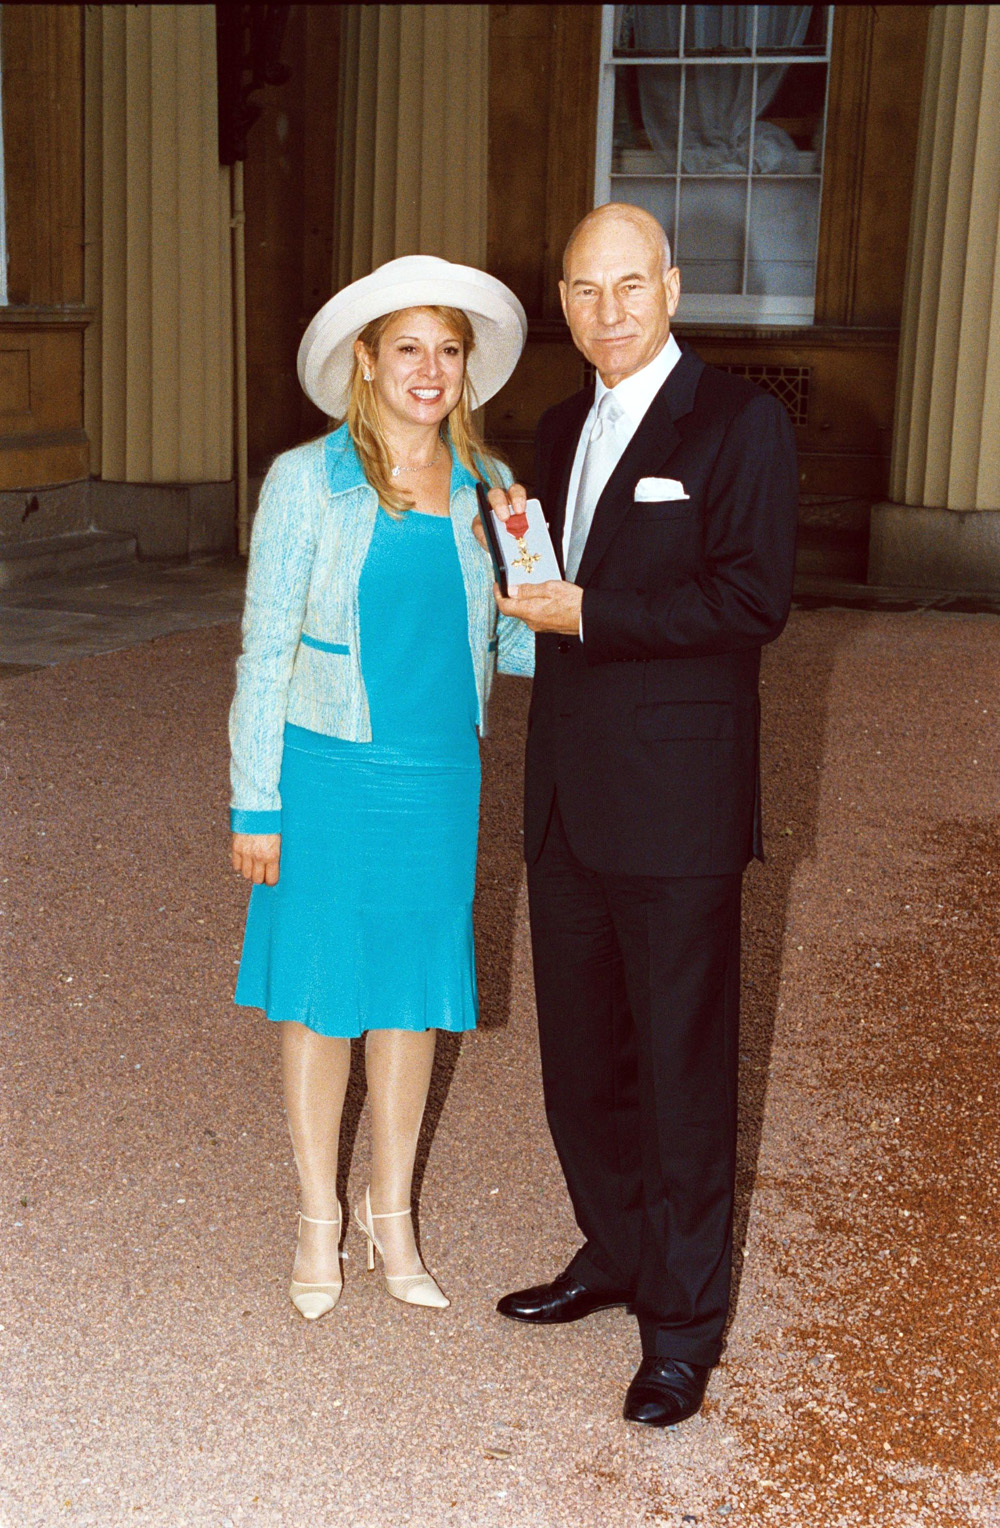 <p>Patrick Stewart and wife Wendy beam after he accepts his OBE honor at Buckingham Palace on Jul. 13, 2001. It was his 61st birthday!</p>